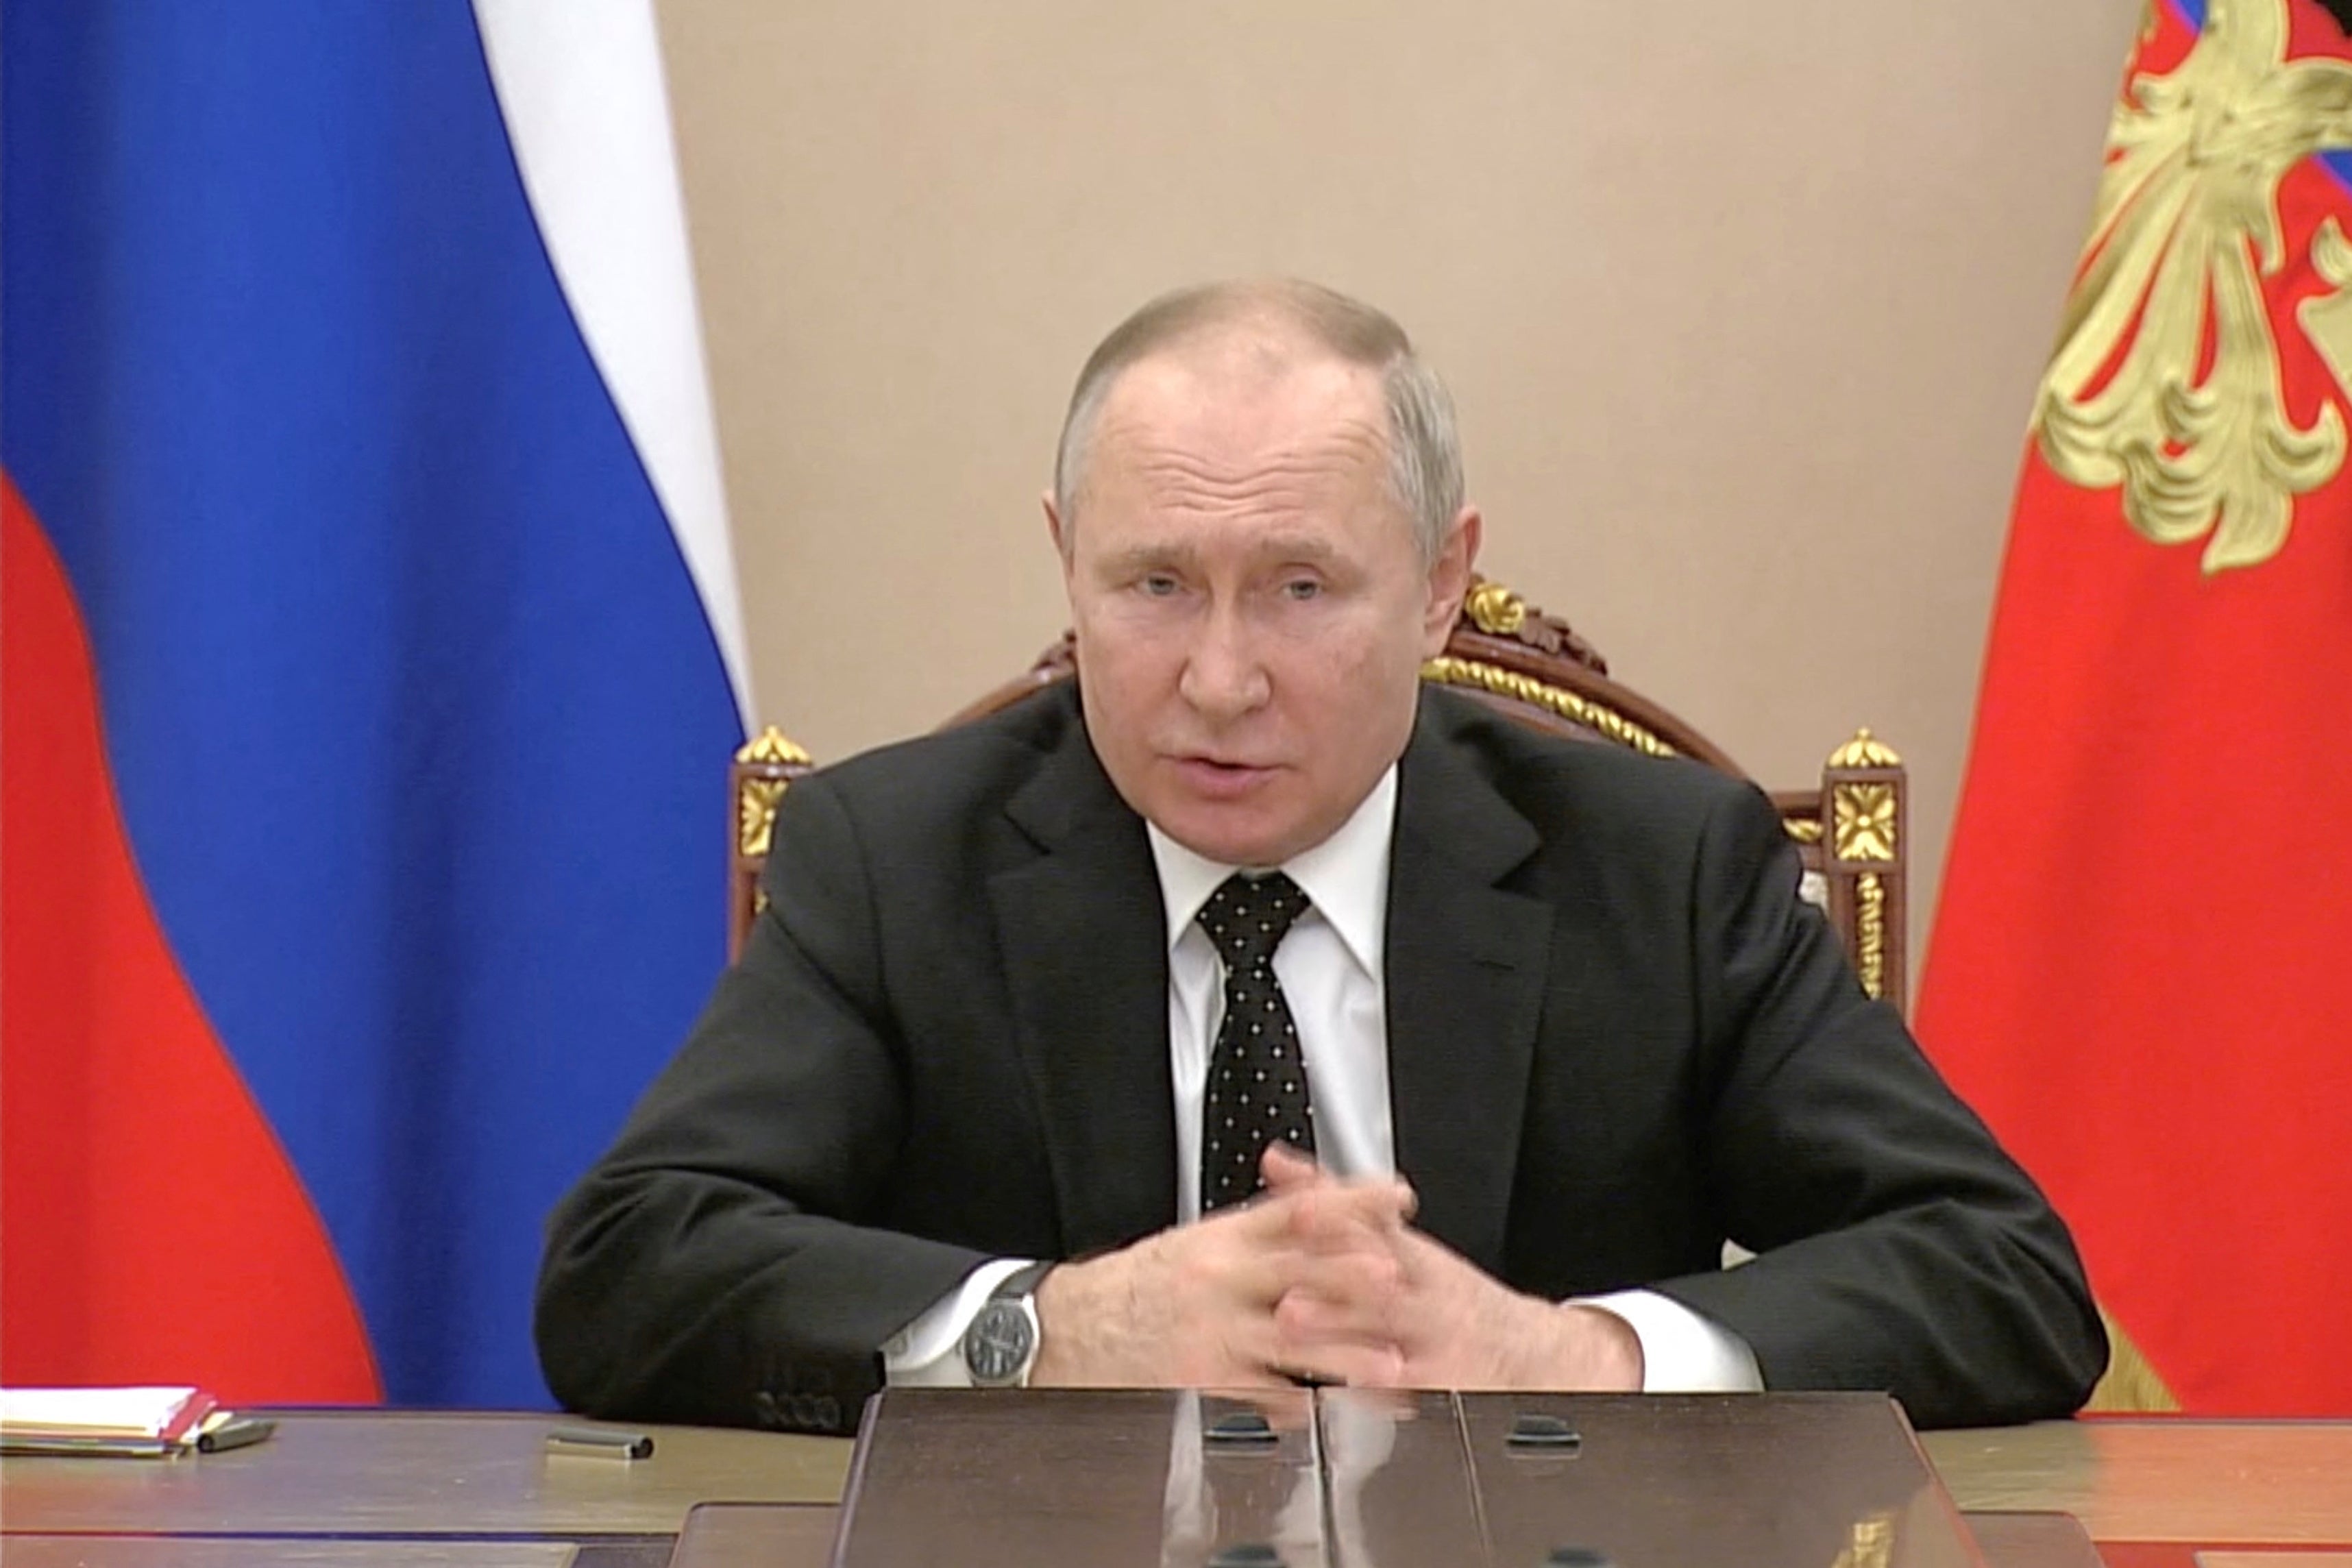 Putin speaks as he sits at a conference table